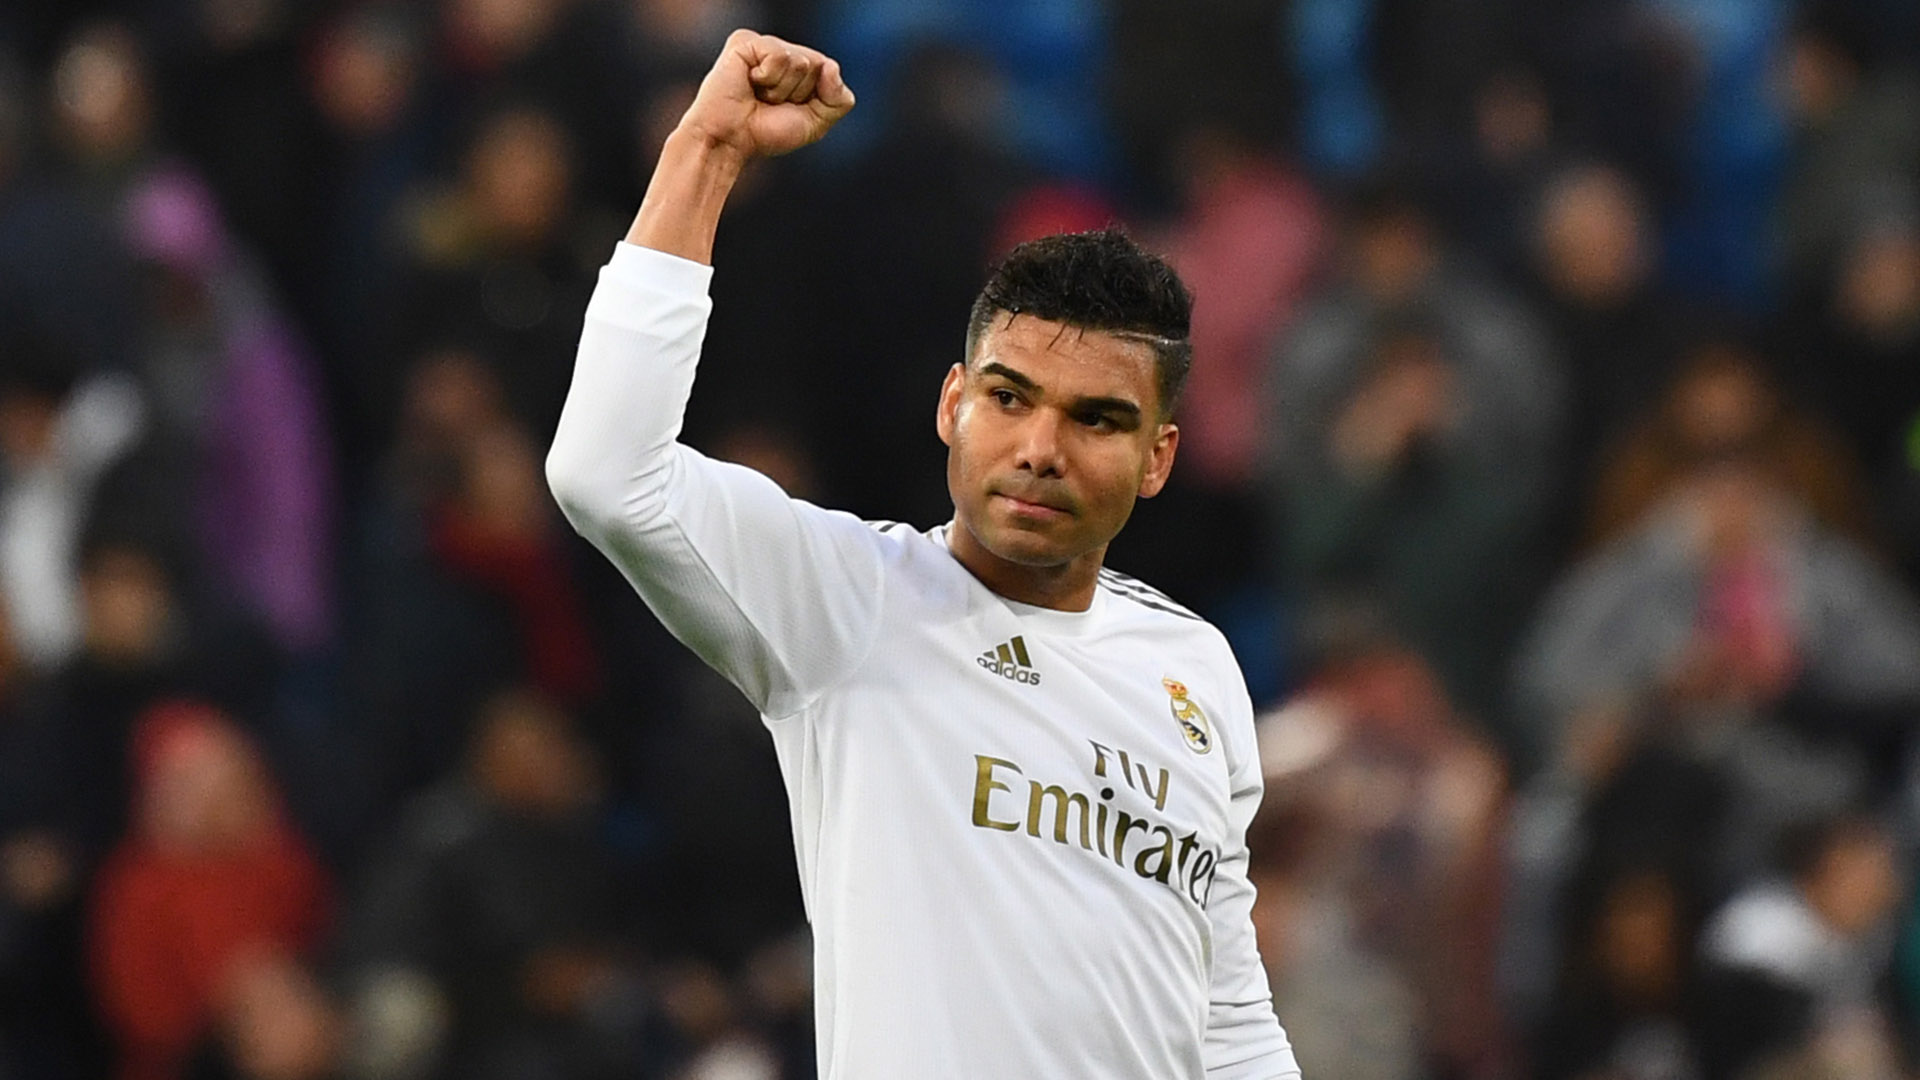 Casemiro is the outstanding leader of the midfield choices